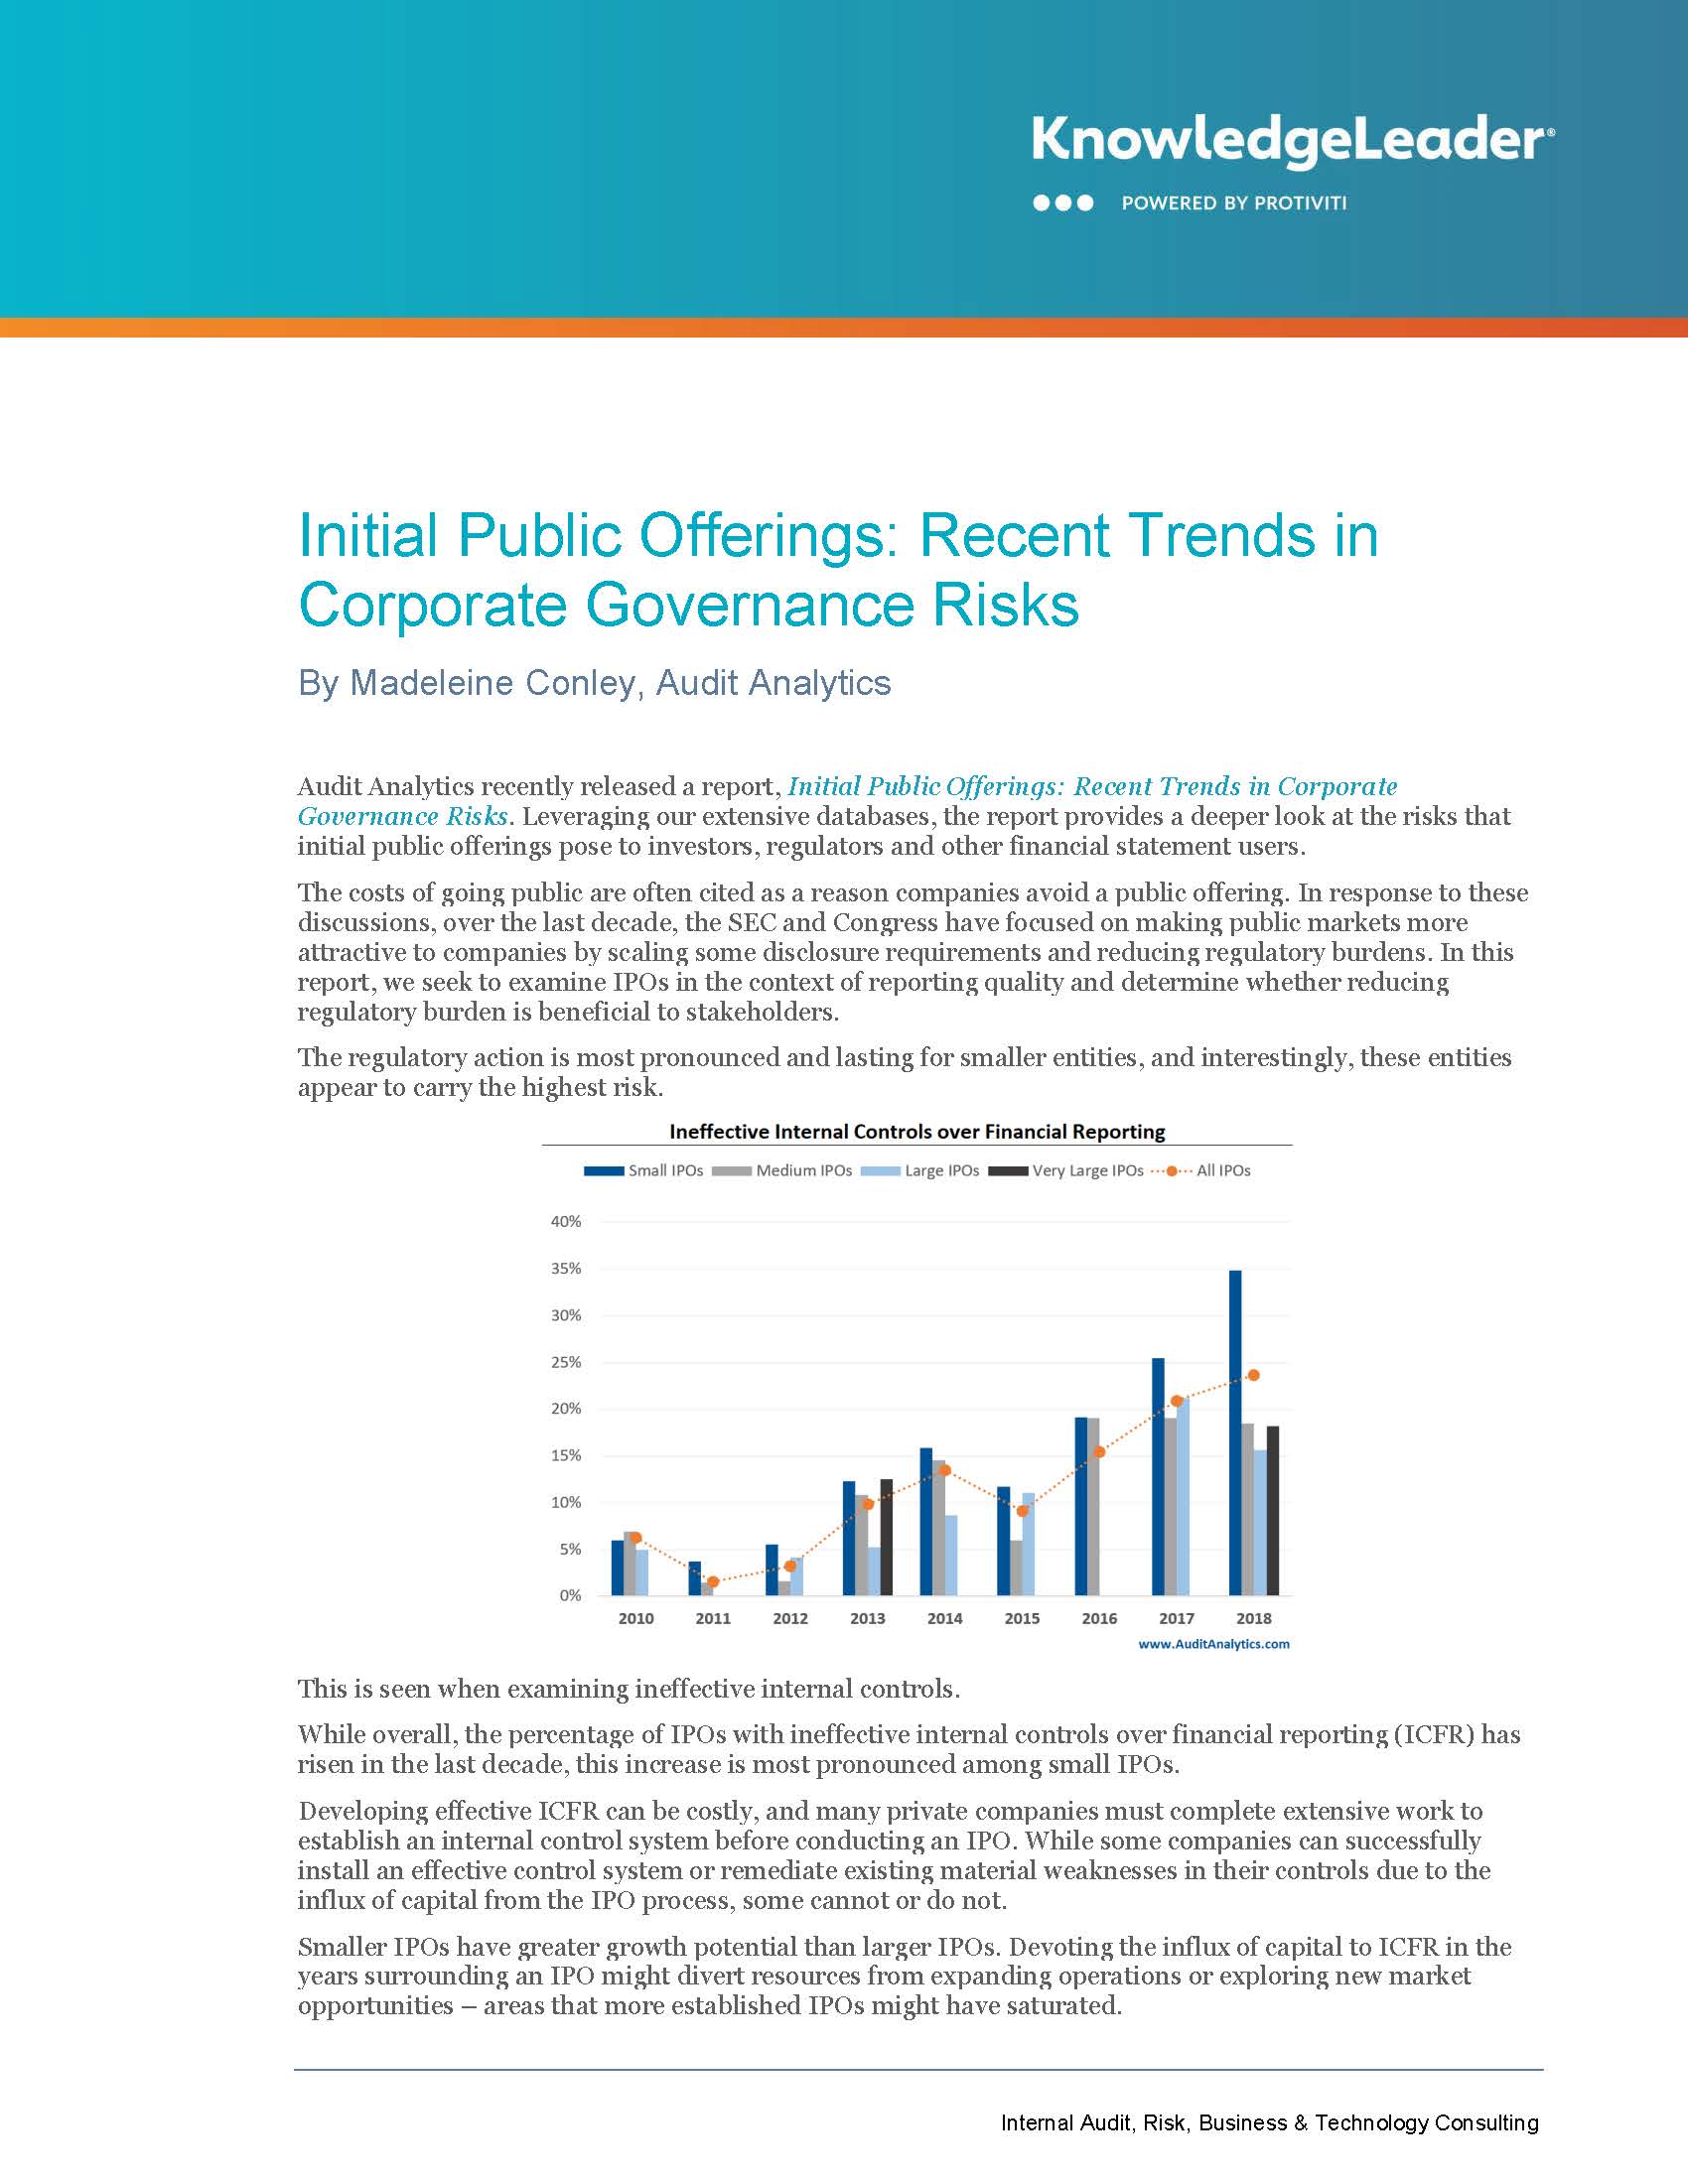 Screenshot of the first page of Initial Public Offerings Recent Trends in Corporate Governance Risks